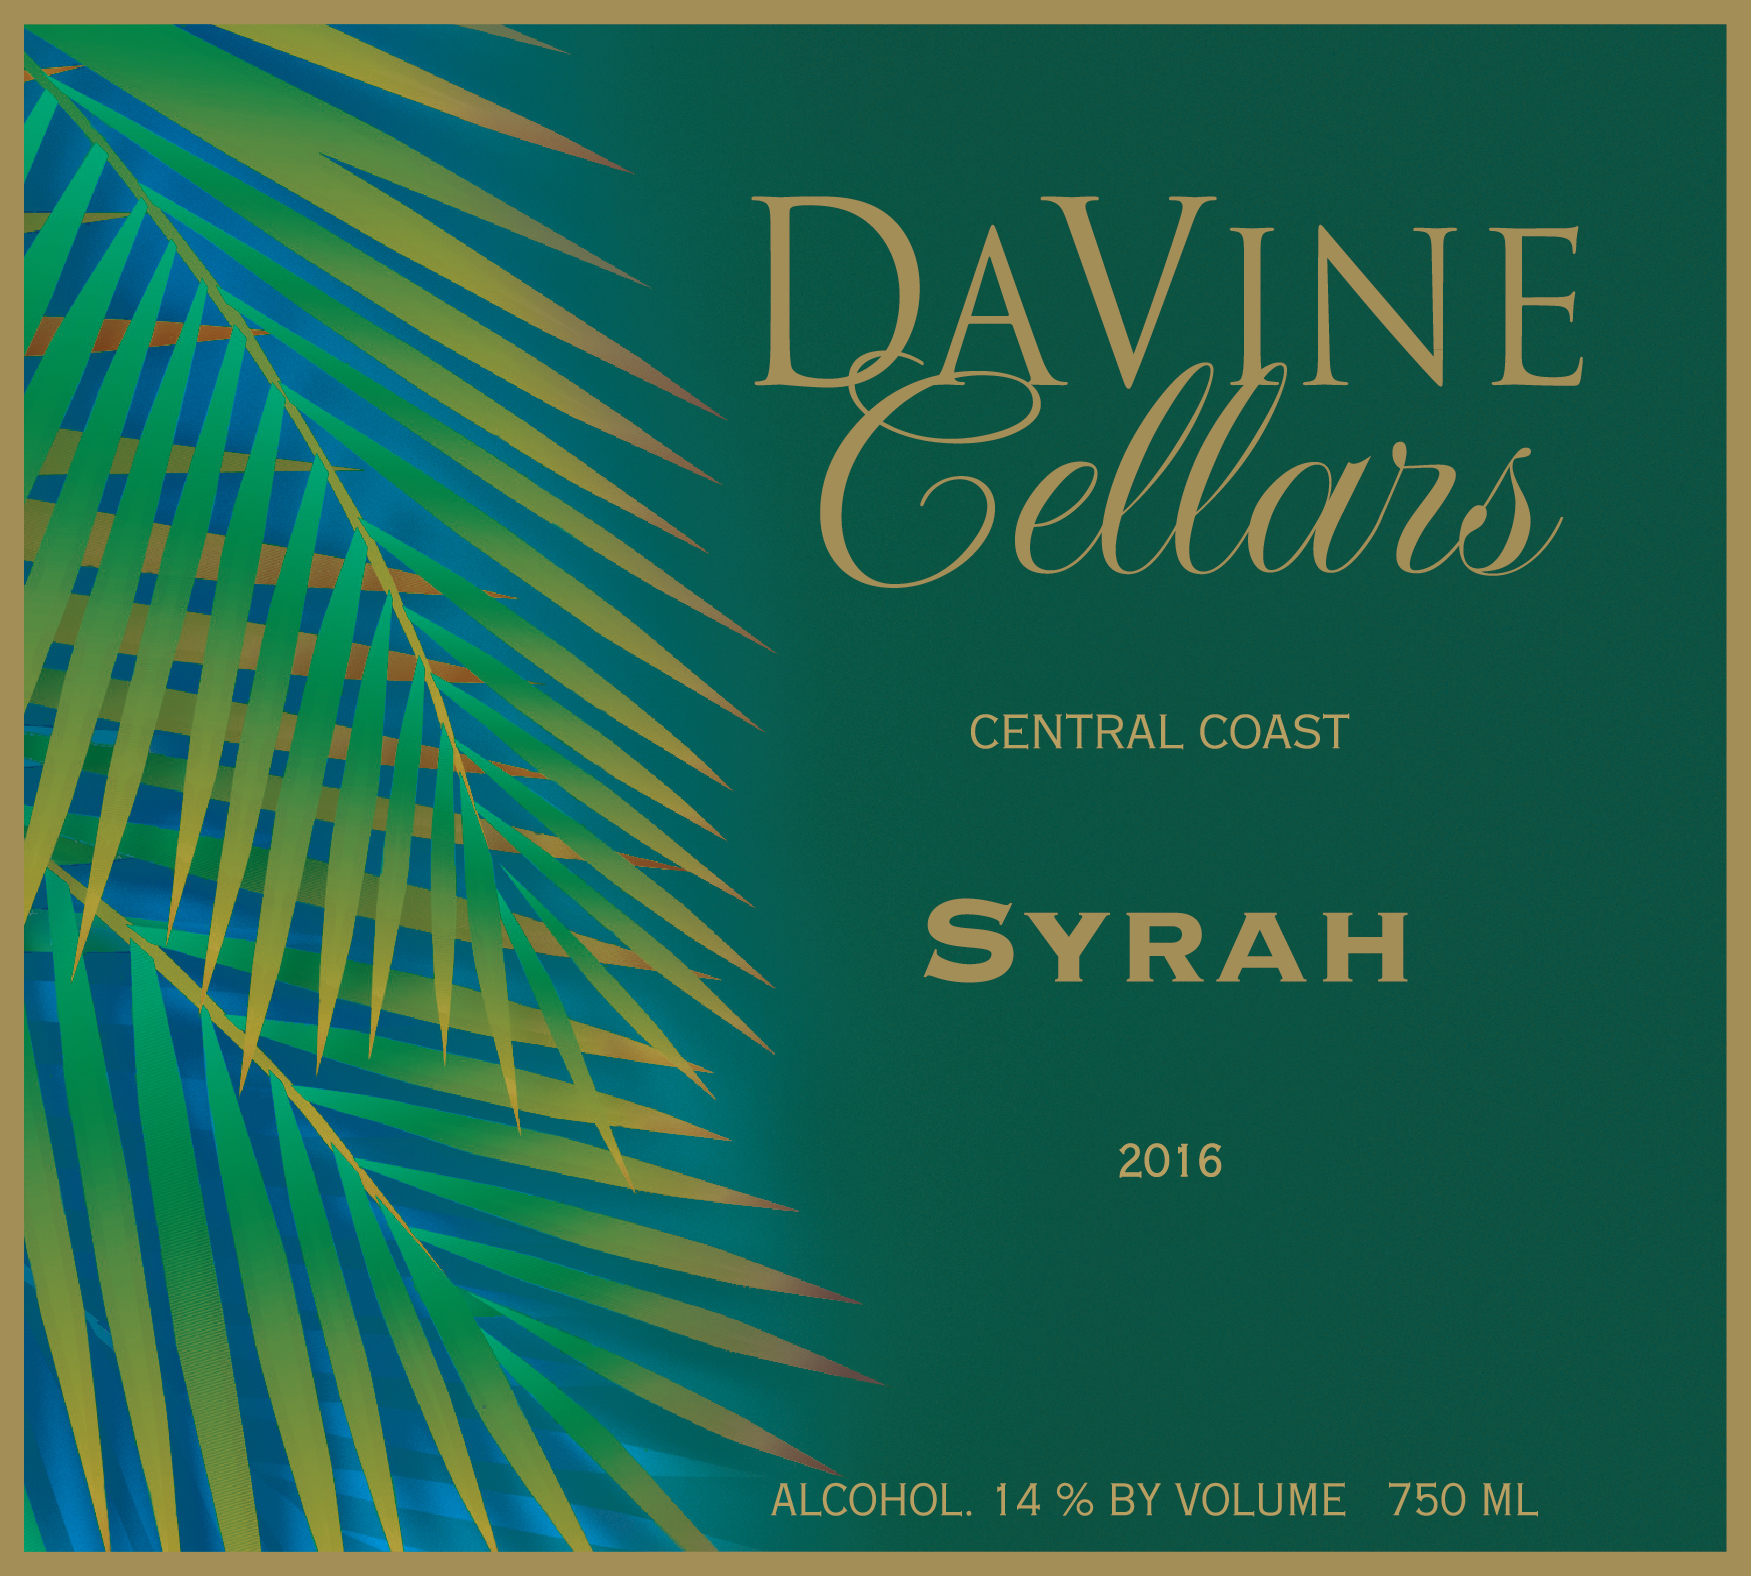 Product Image for 2016 Central Coast Syrah "Que Syrah"